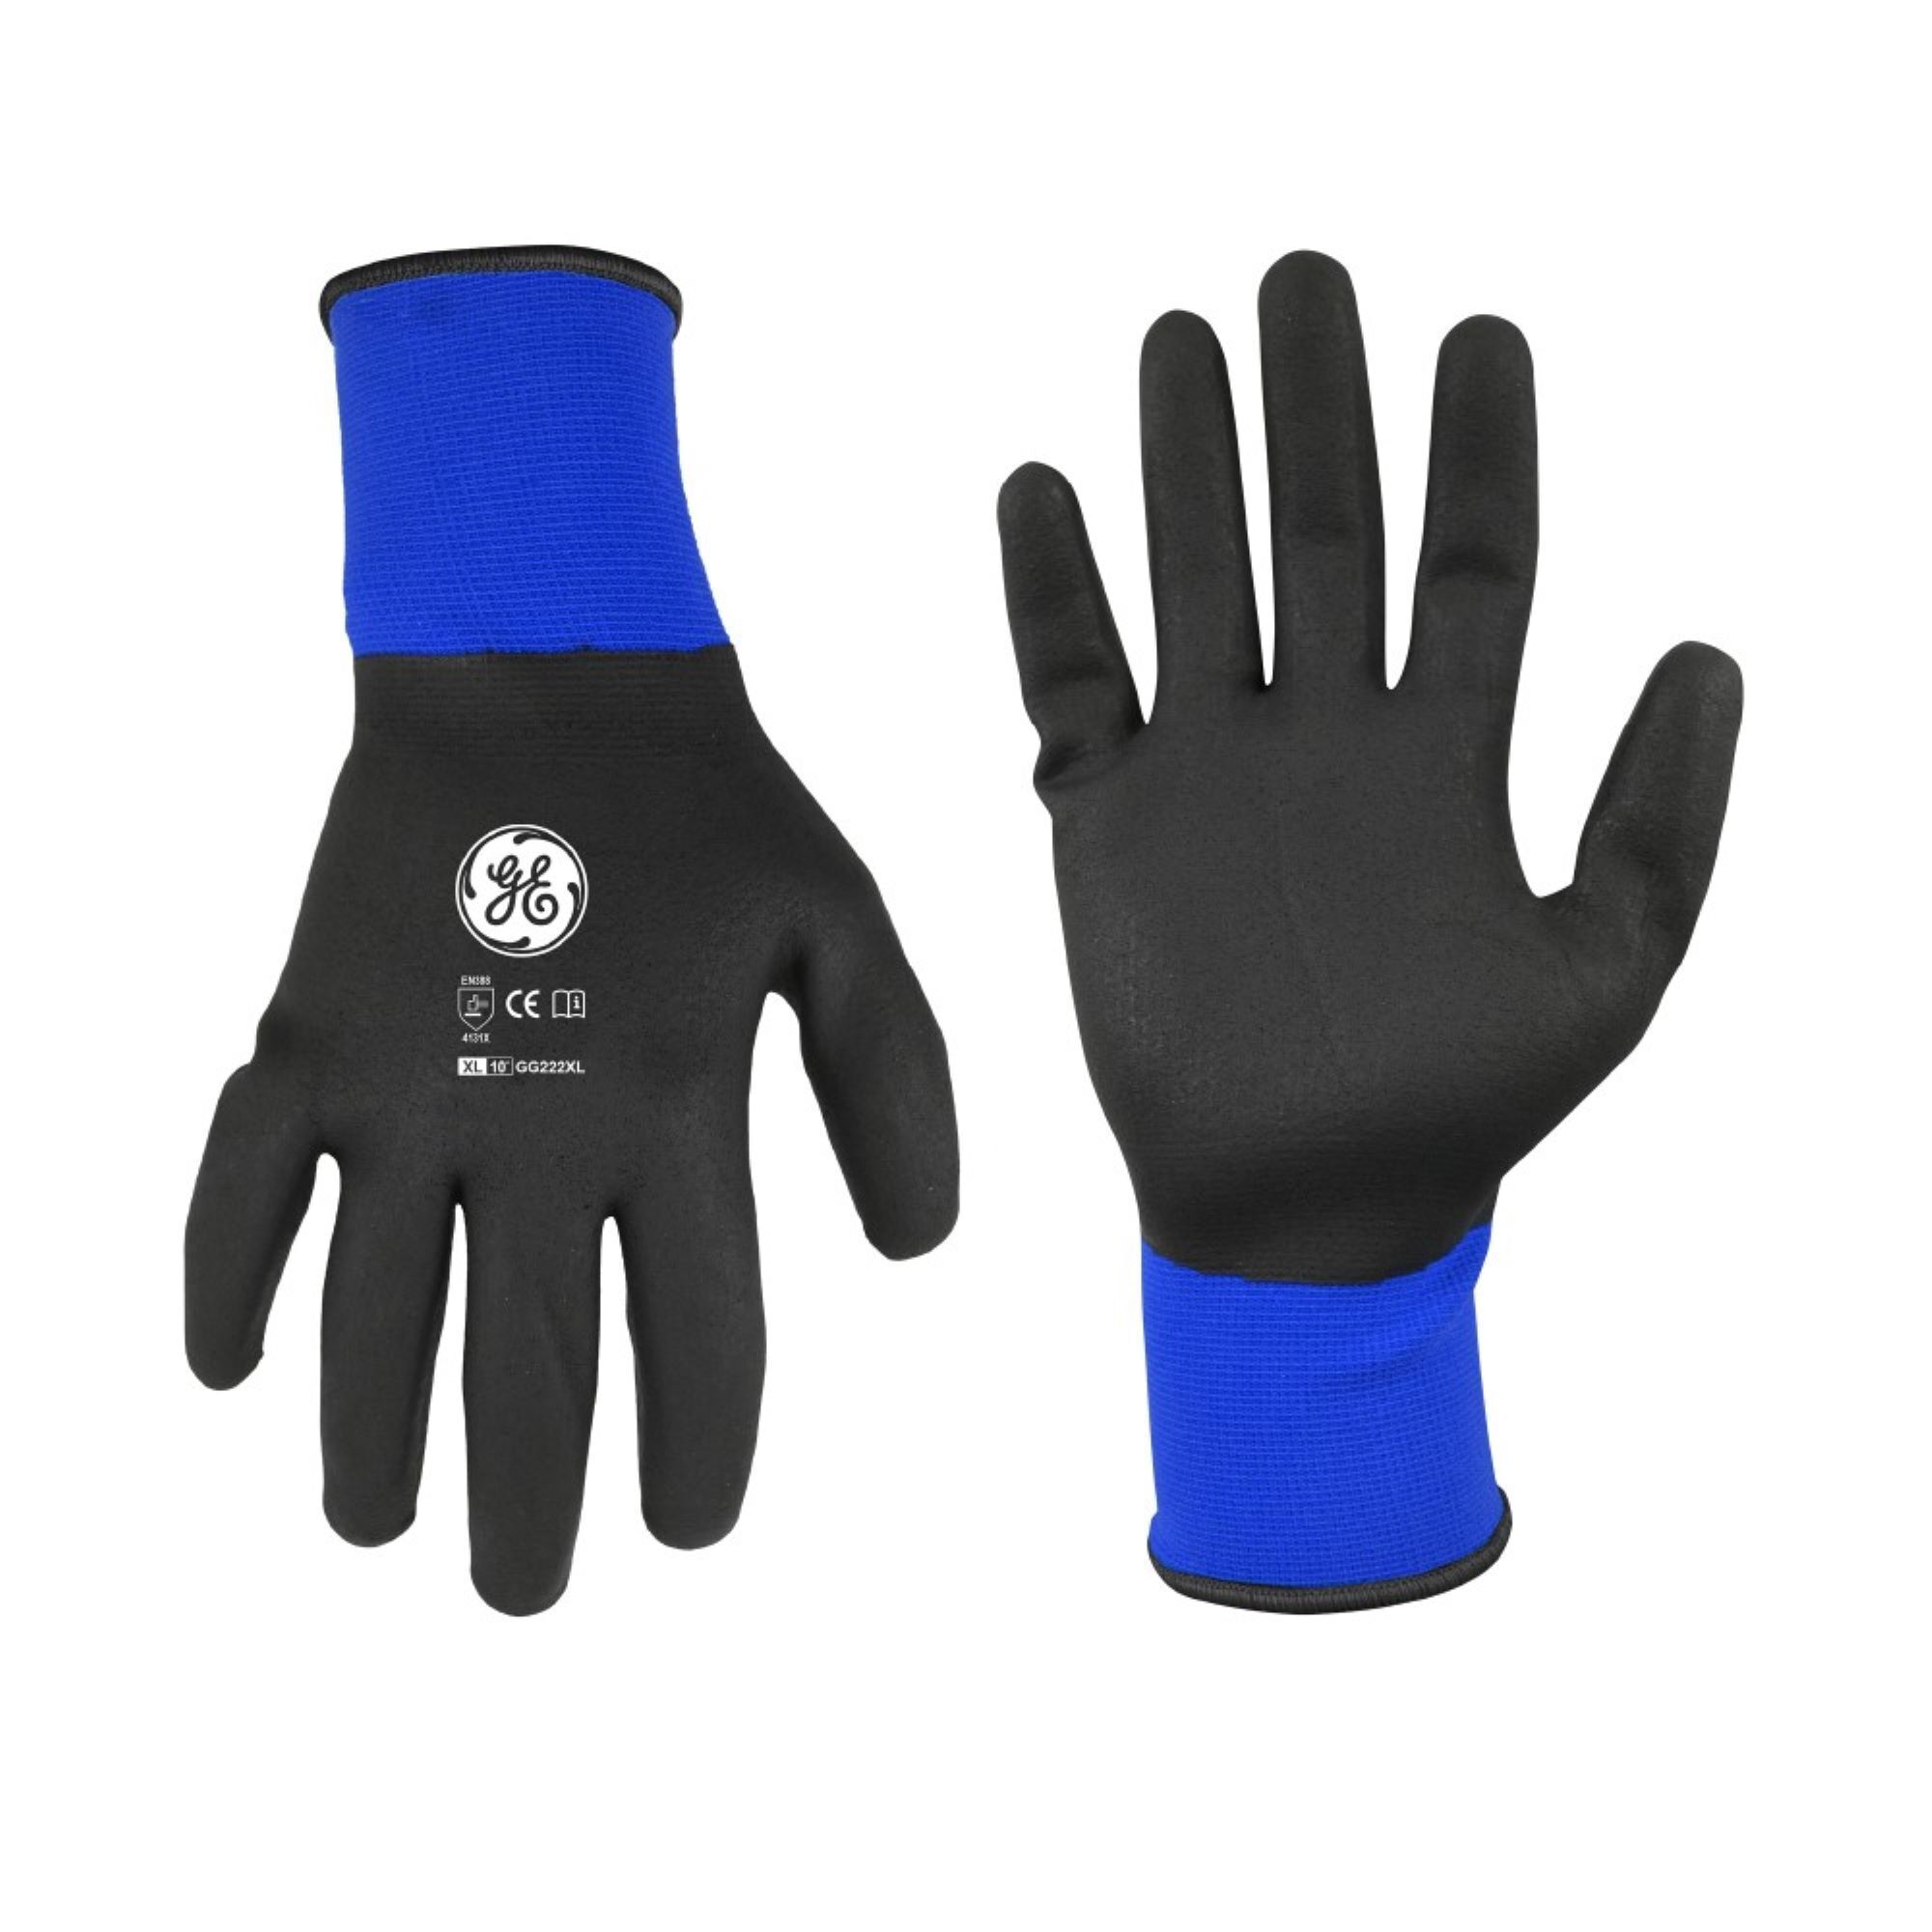 General Electric, XL Foam Nitrile Black/Blue Dipped Gloves 12 pairs, Size XL, Included (qty.) 12, Model GG222XL